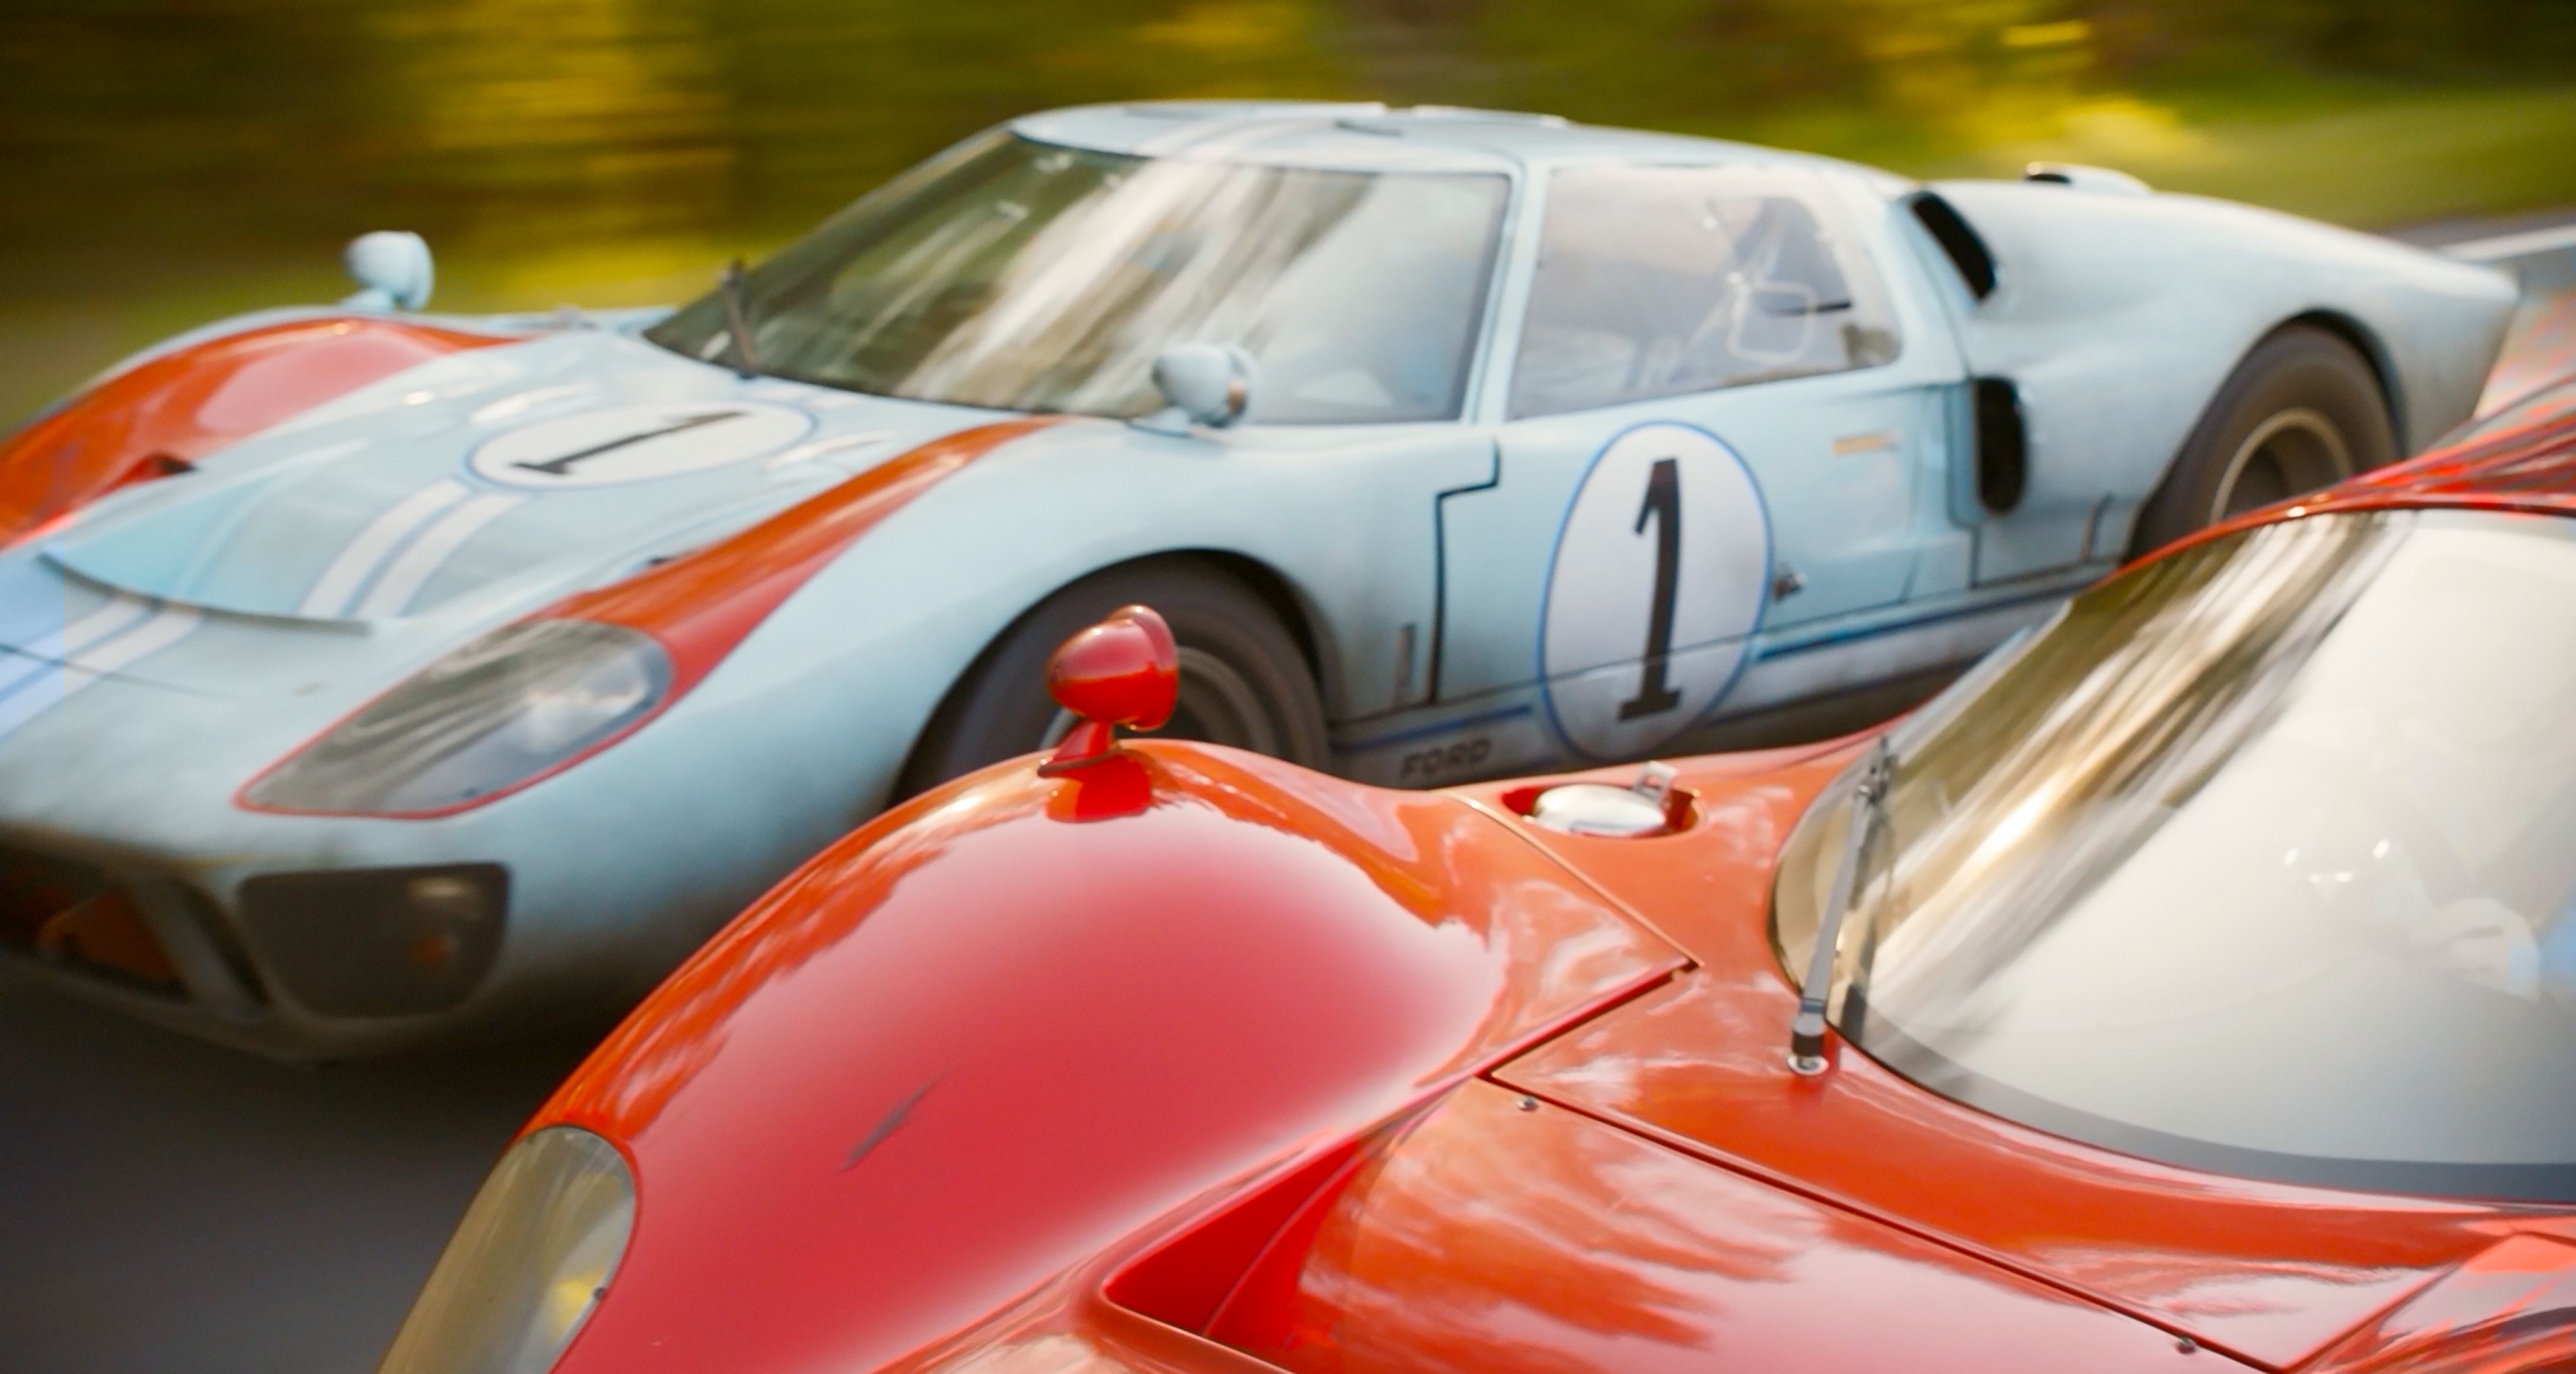 Ford V Ferrari Is The Rare Car Movie With Good Storytelling